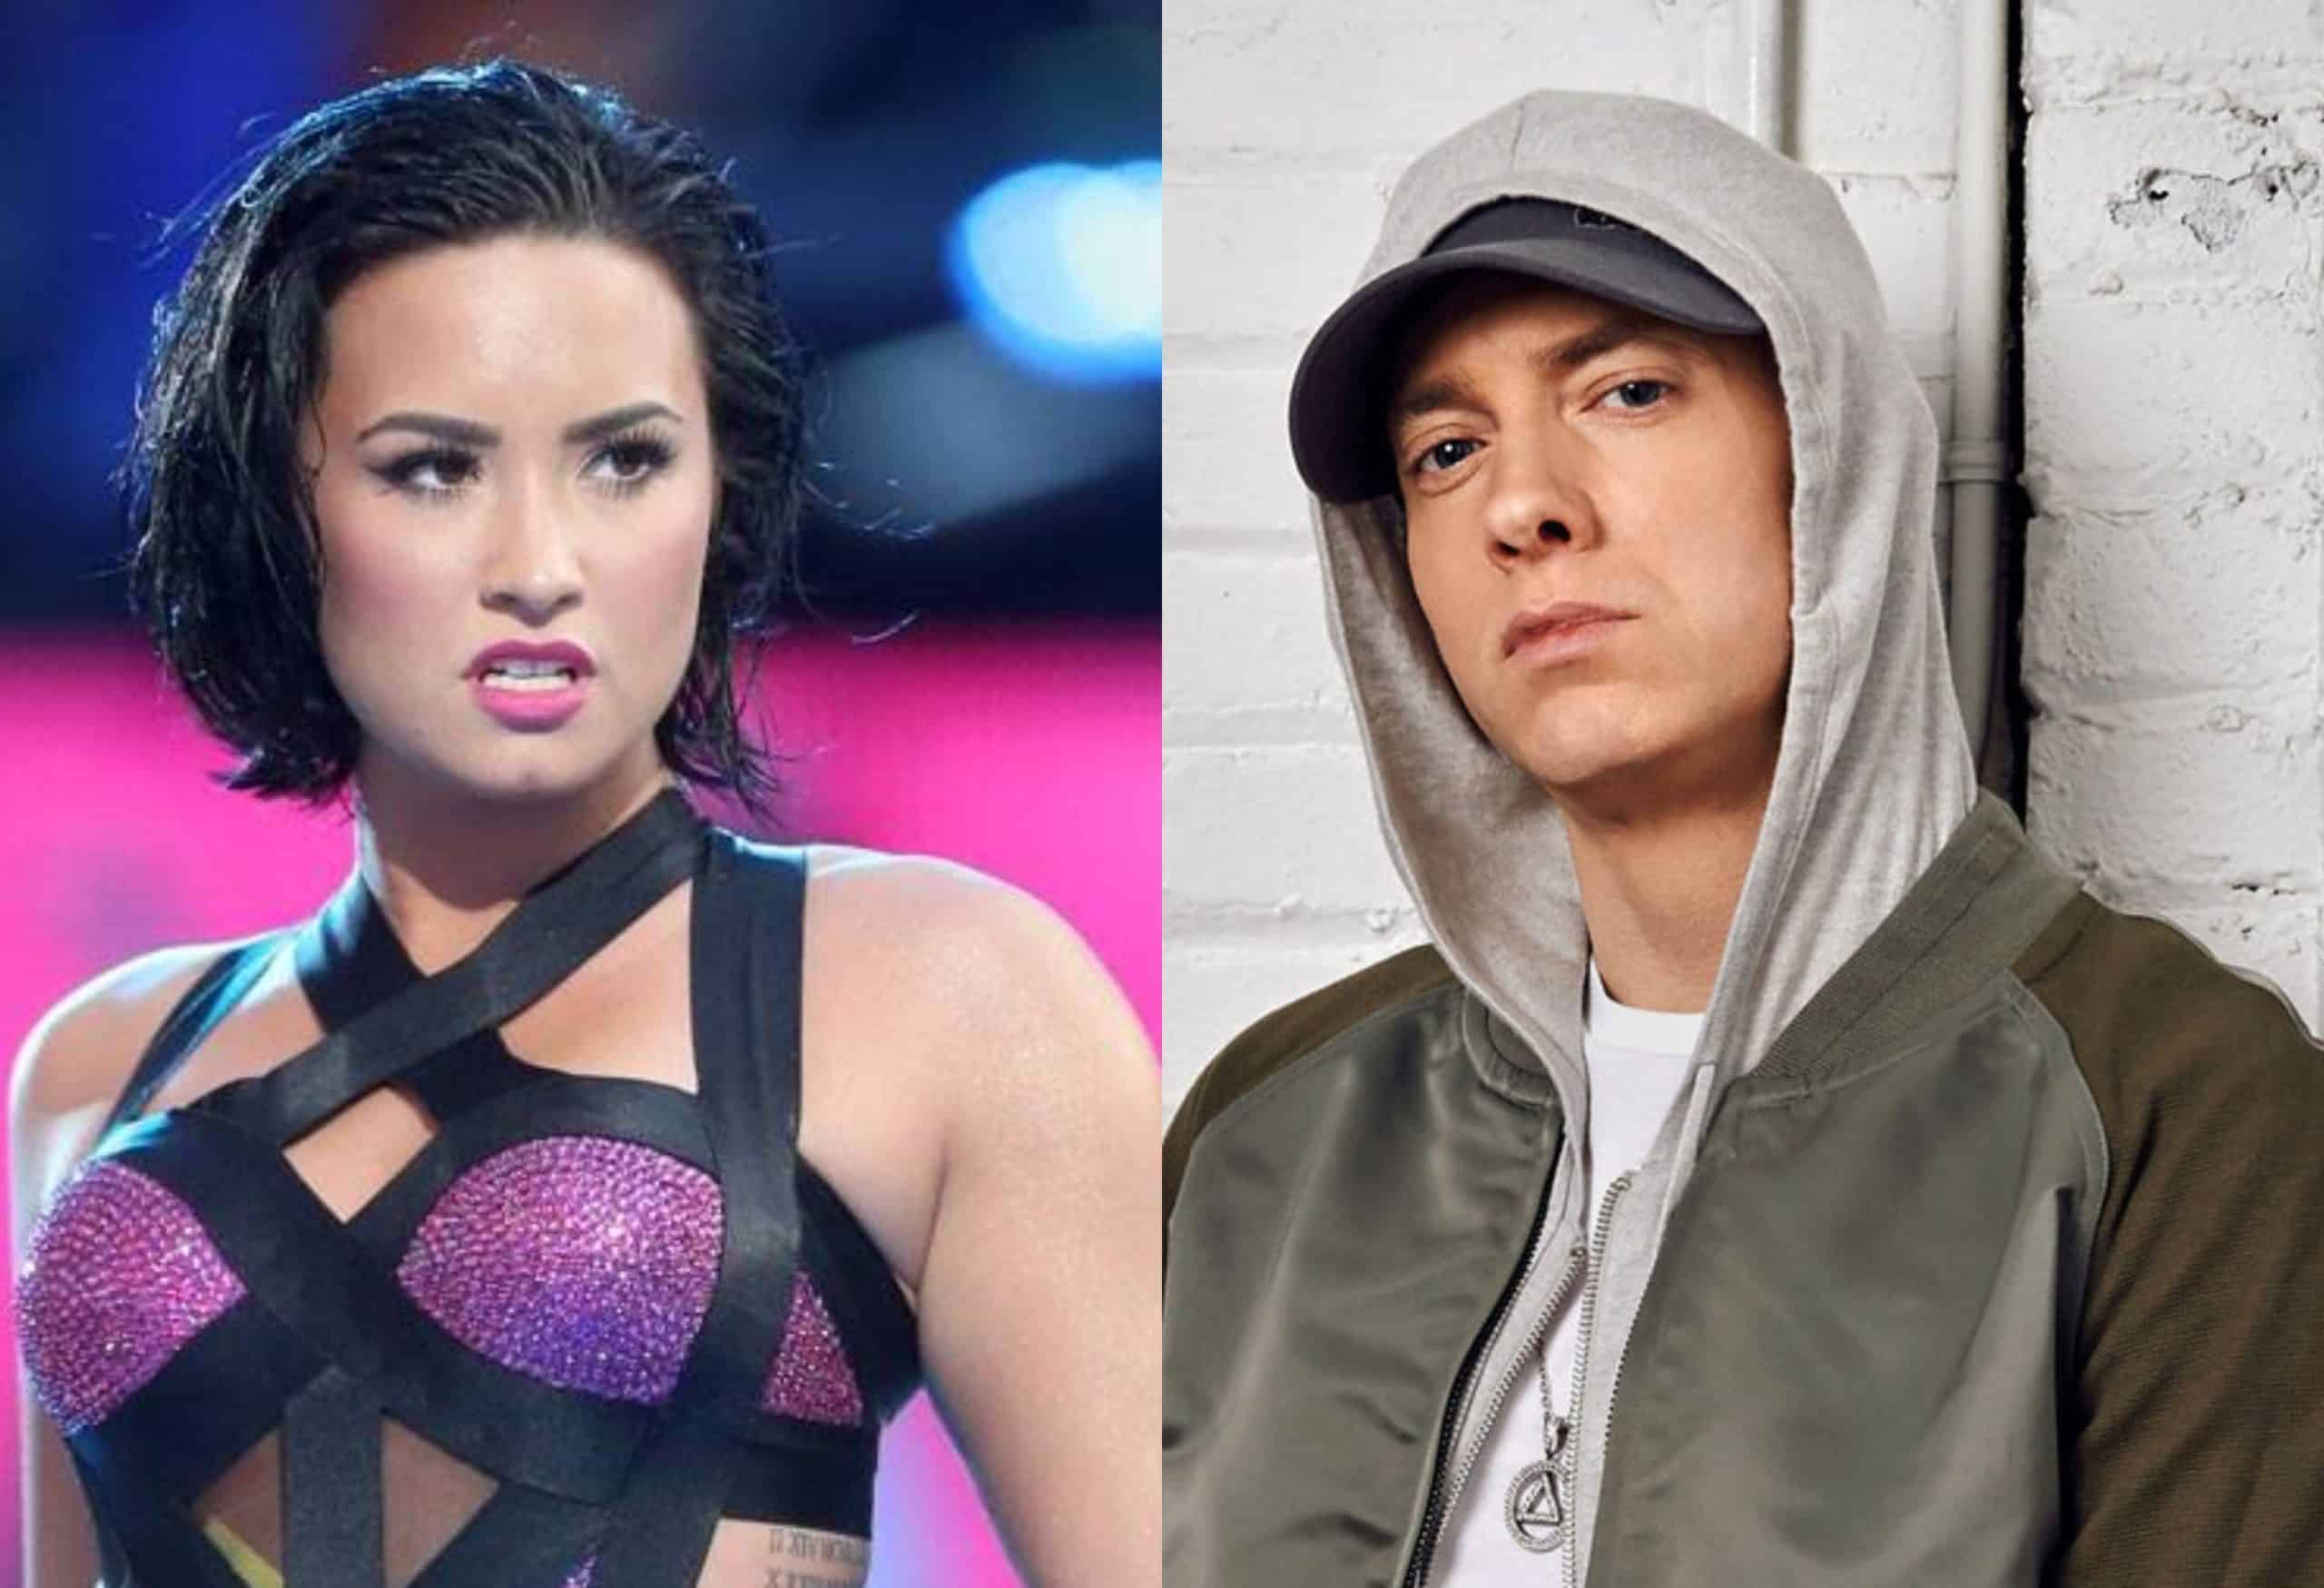 Demi Lovato wants to work with Eminem